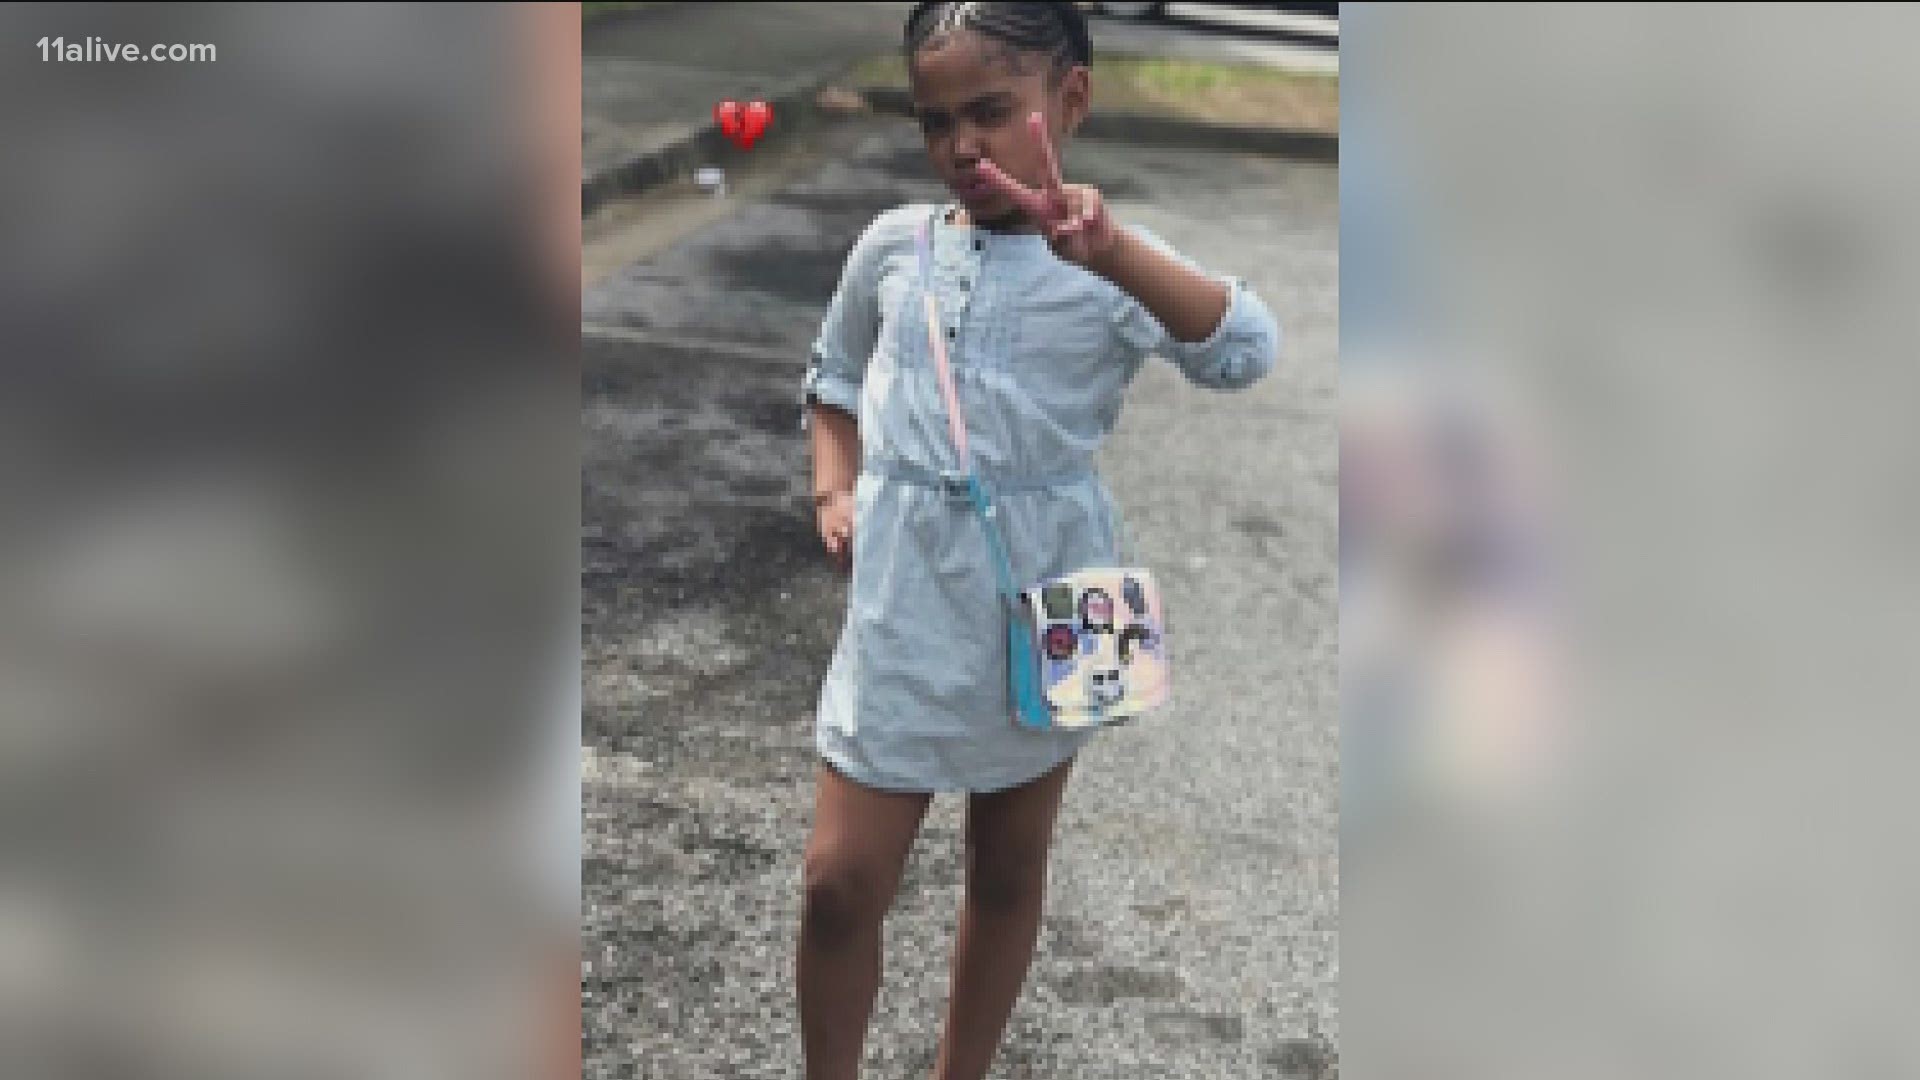 Among the most heartbreaking crime of the night was the shooting death of eight-year-old Secoriea Turner.